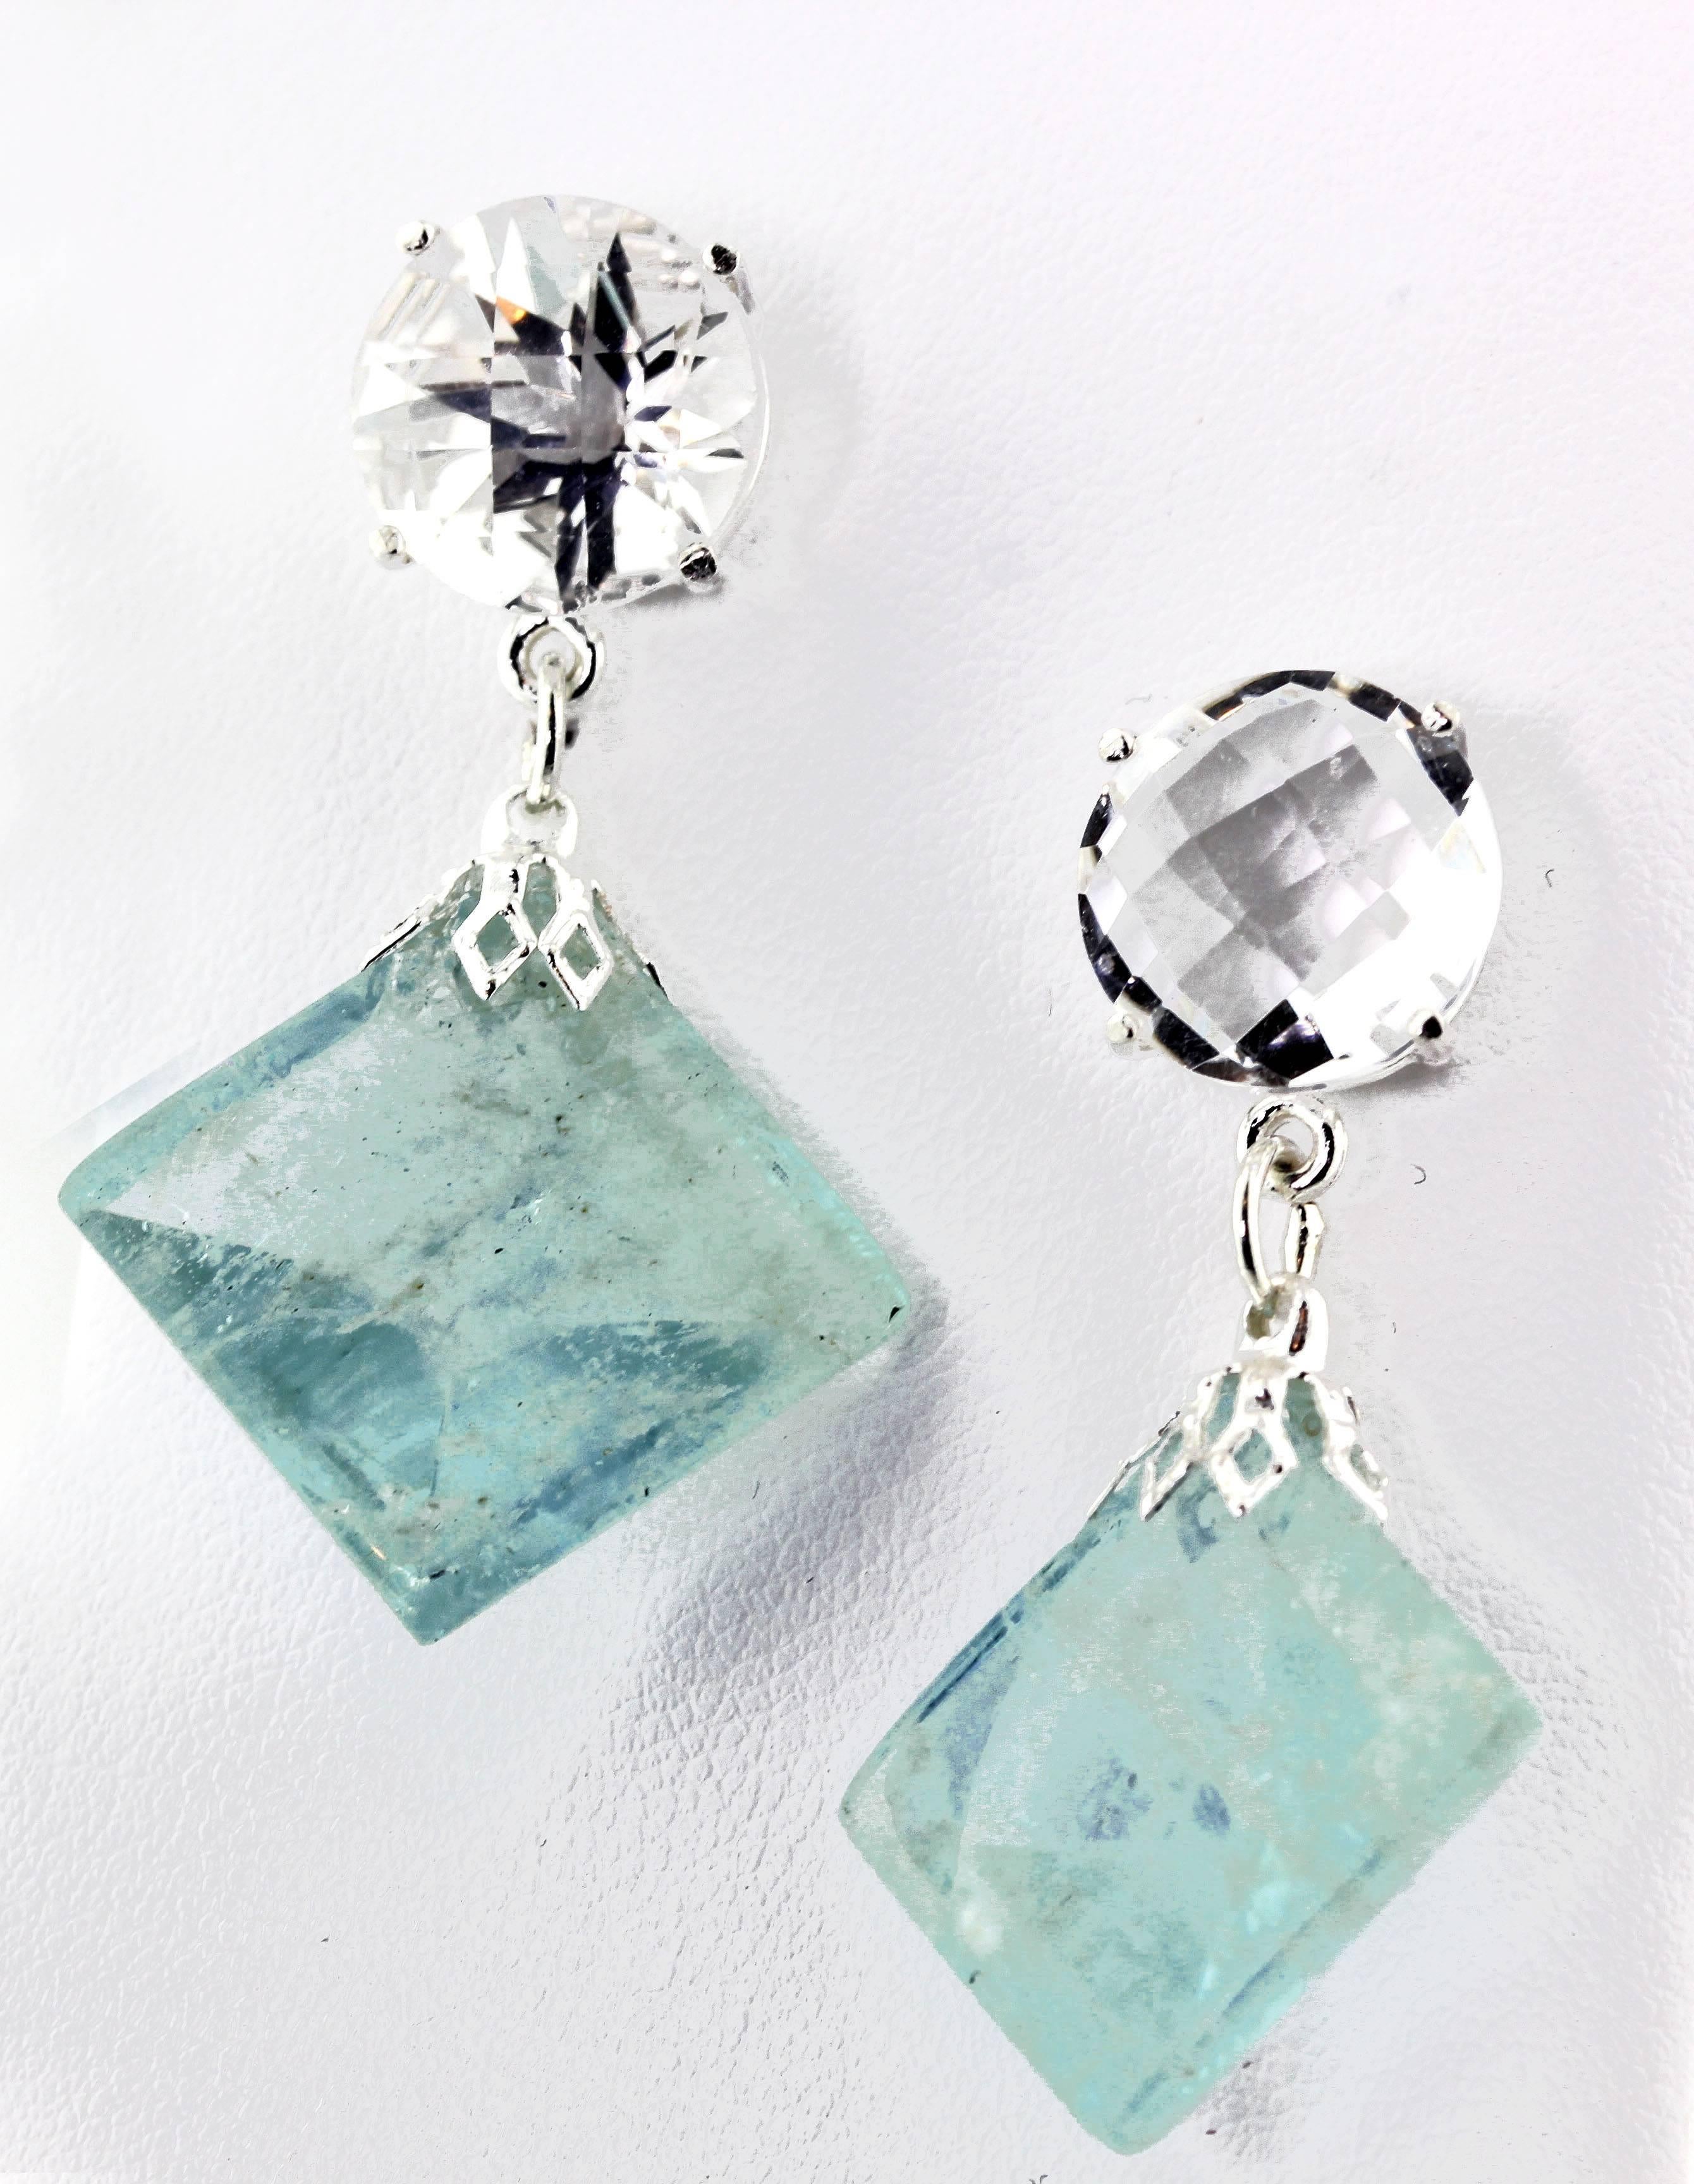 32 carats of unique Aquamarines (18 mm x 18 mm) dangle brightly from glittering checkerboard gem cut round silver white translucent Quartz (12 mm) on handmade sterling silver stud earrings. Spectacular optical effect in the aquamarines exhibits